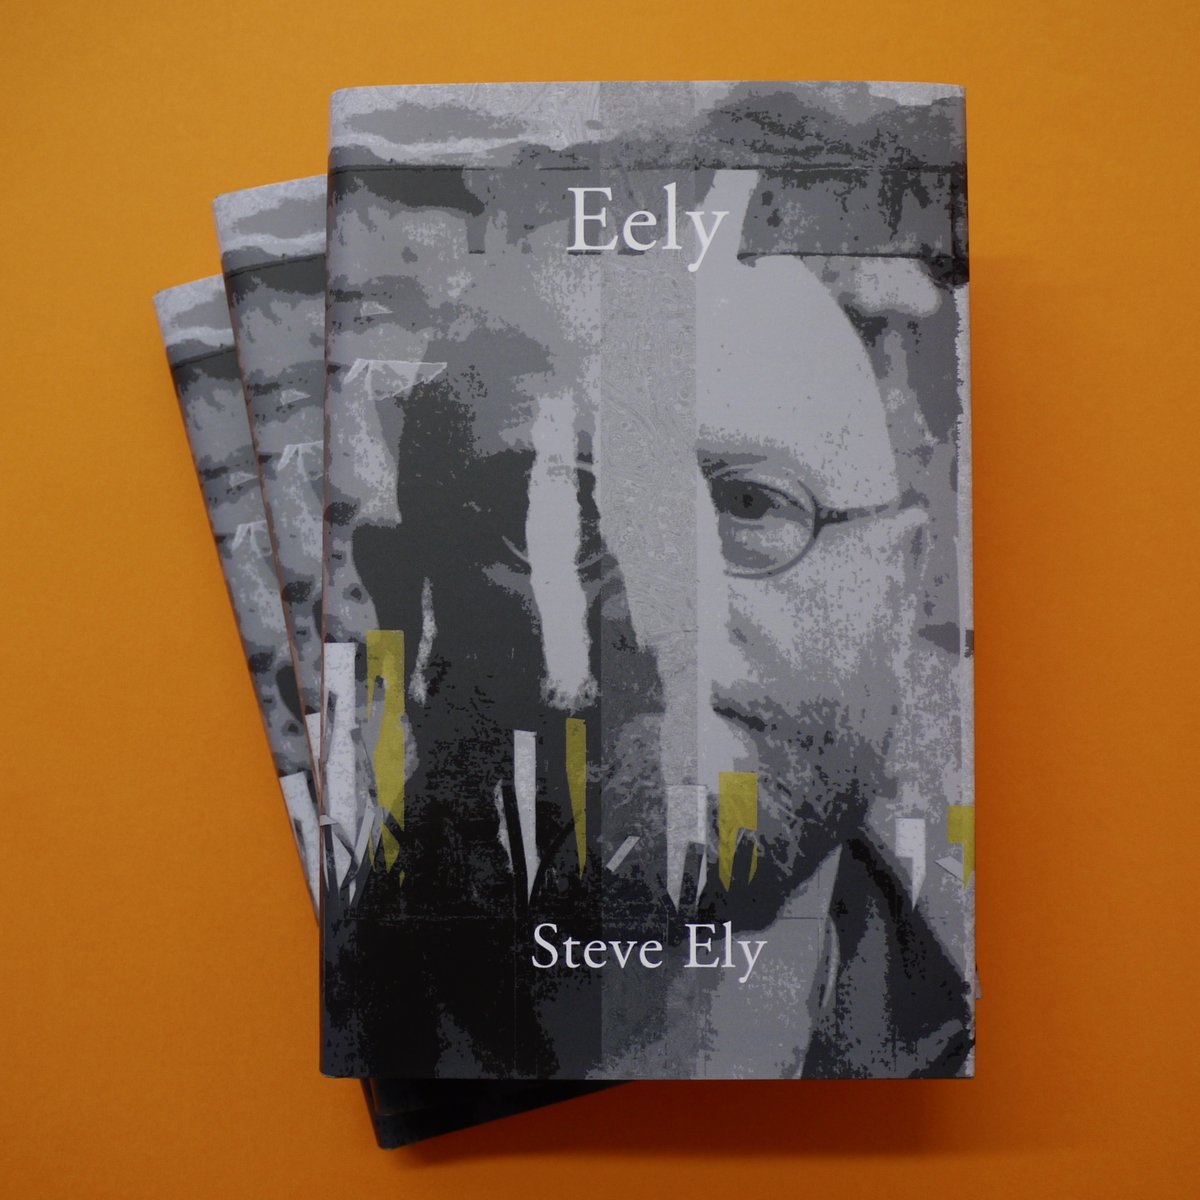 Brigantes, Parisi, Iceni, Trinovantes:
or the reed-wraiths preceding, haunting
the roke in the smoke of crepuscular campfires,
prehistory’s glaucous gloaming.

'Eely' 
Steve Ely
Out now 
longbarrowpress.com/current-public…